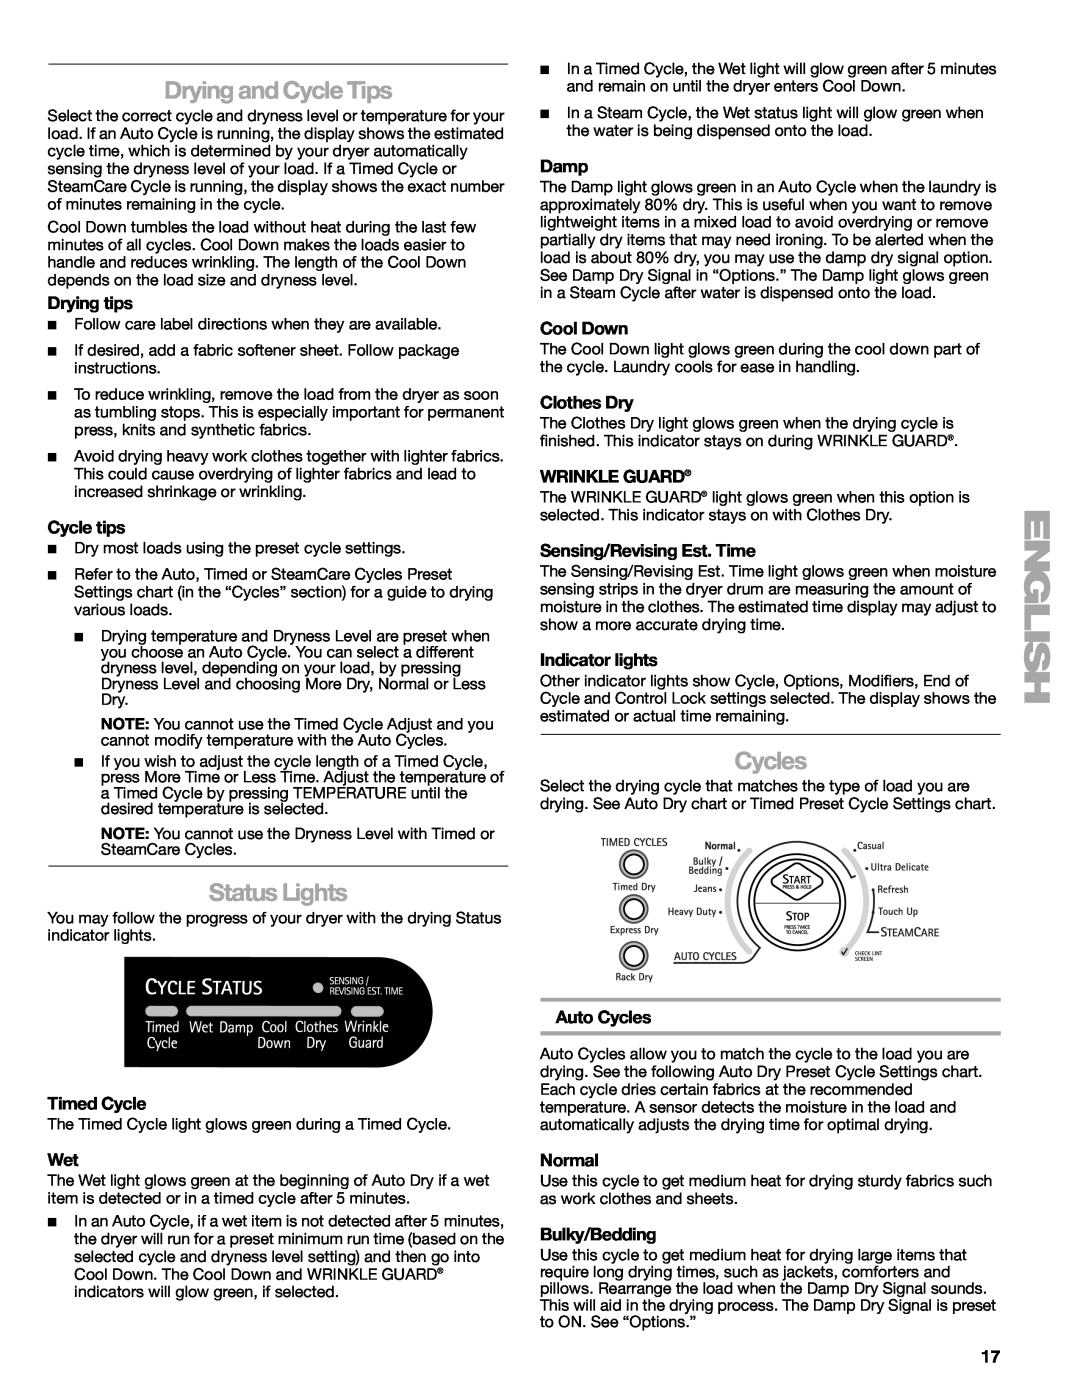 Suunto 110.9772 manual Drying and Cycle Tips, Status Lights, Cycles, Drying tips, Cycle tips, Timed Cycle, Damp, Cool Down 